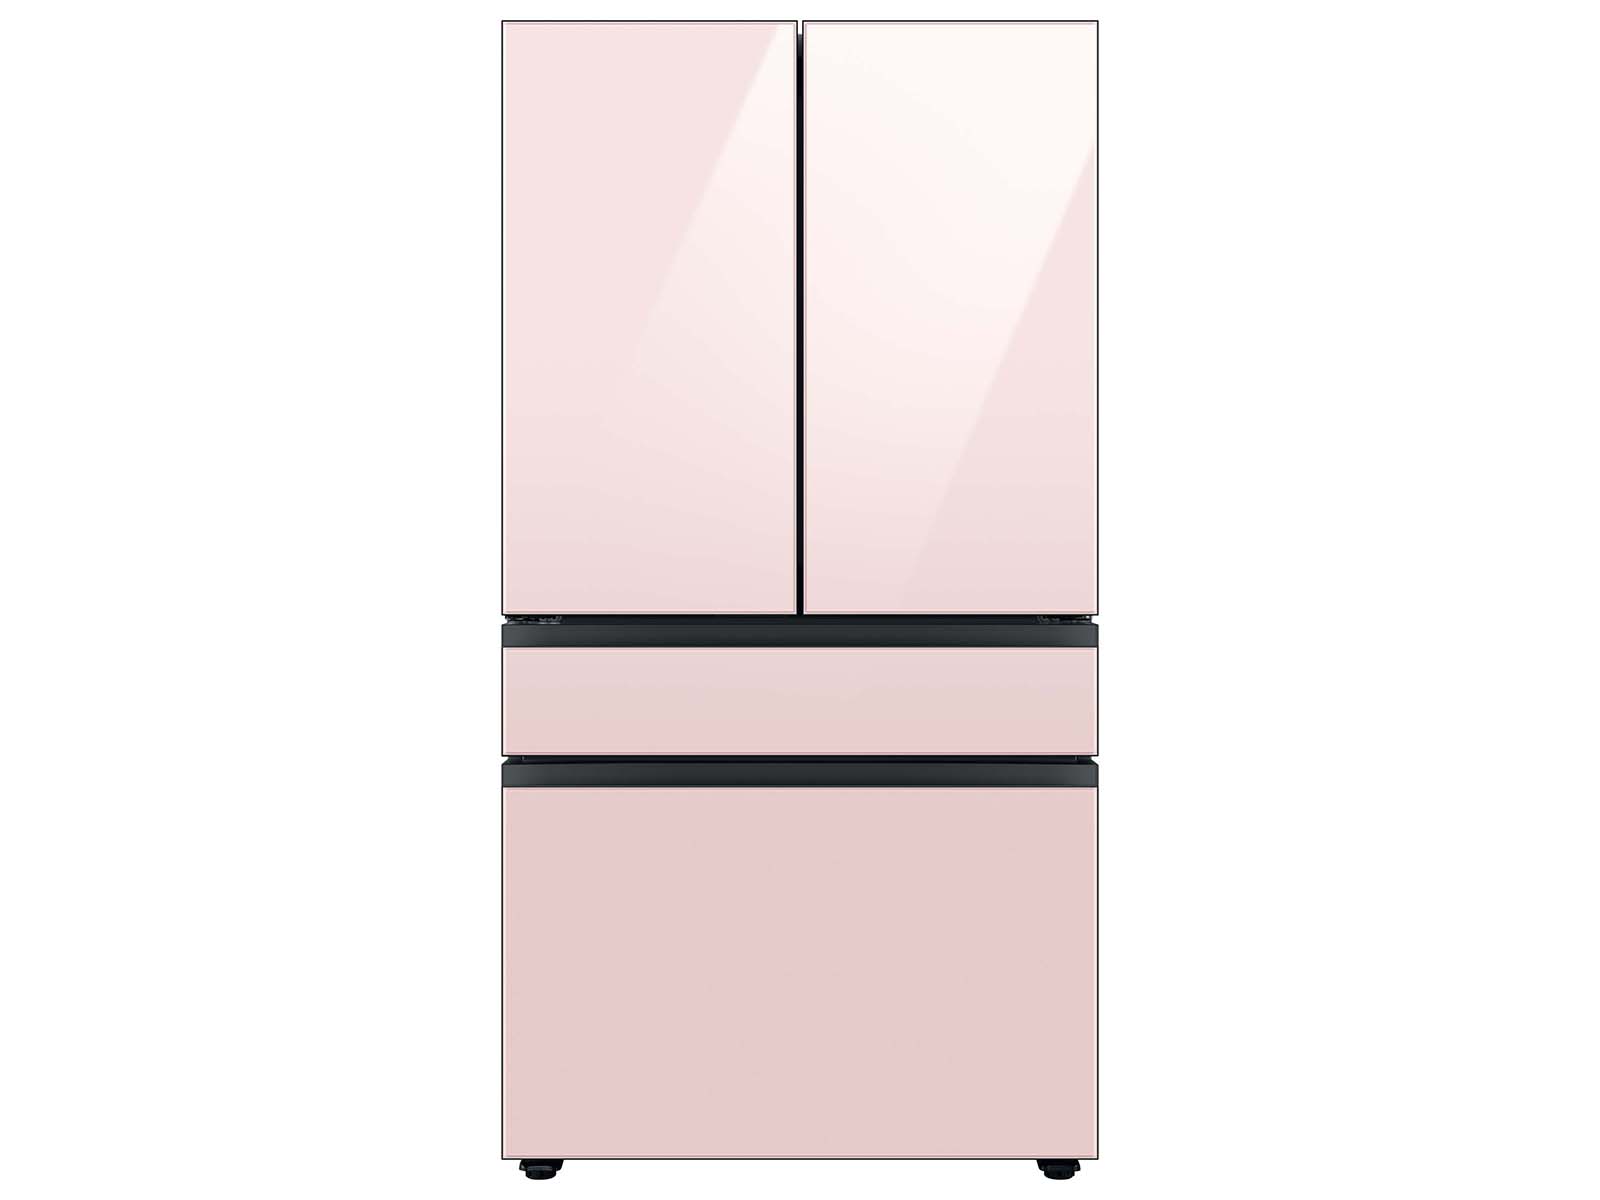 Samsung Bespoke 4-Door French Door Refrigerator in White Glass (23 cu. ft.) with AutoFill Water Pitcher and Customizable Door Panel Colors in Rose Pink Glass